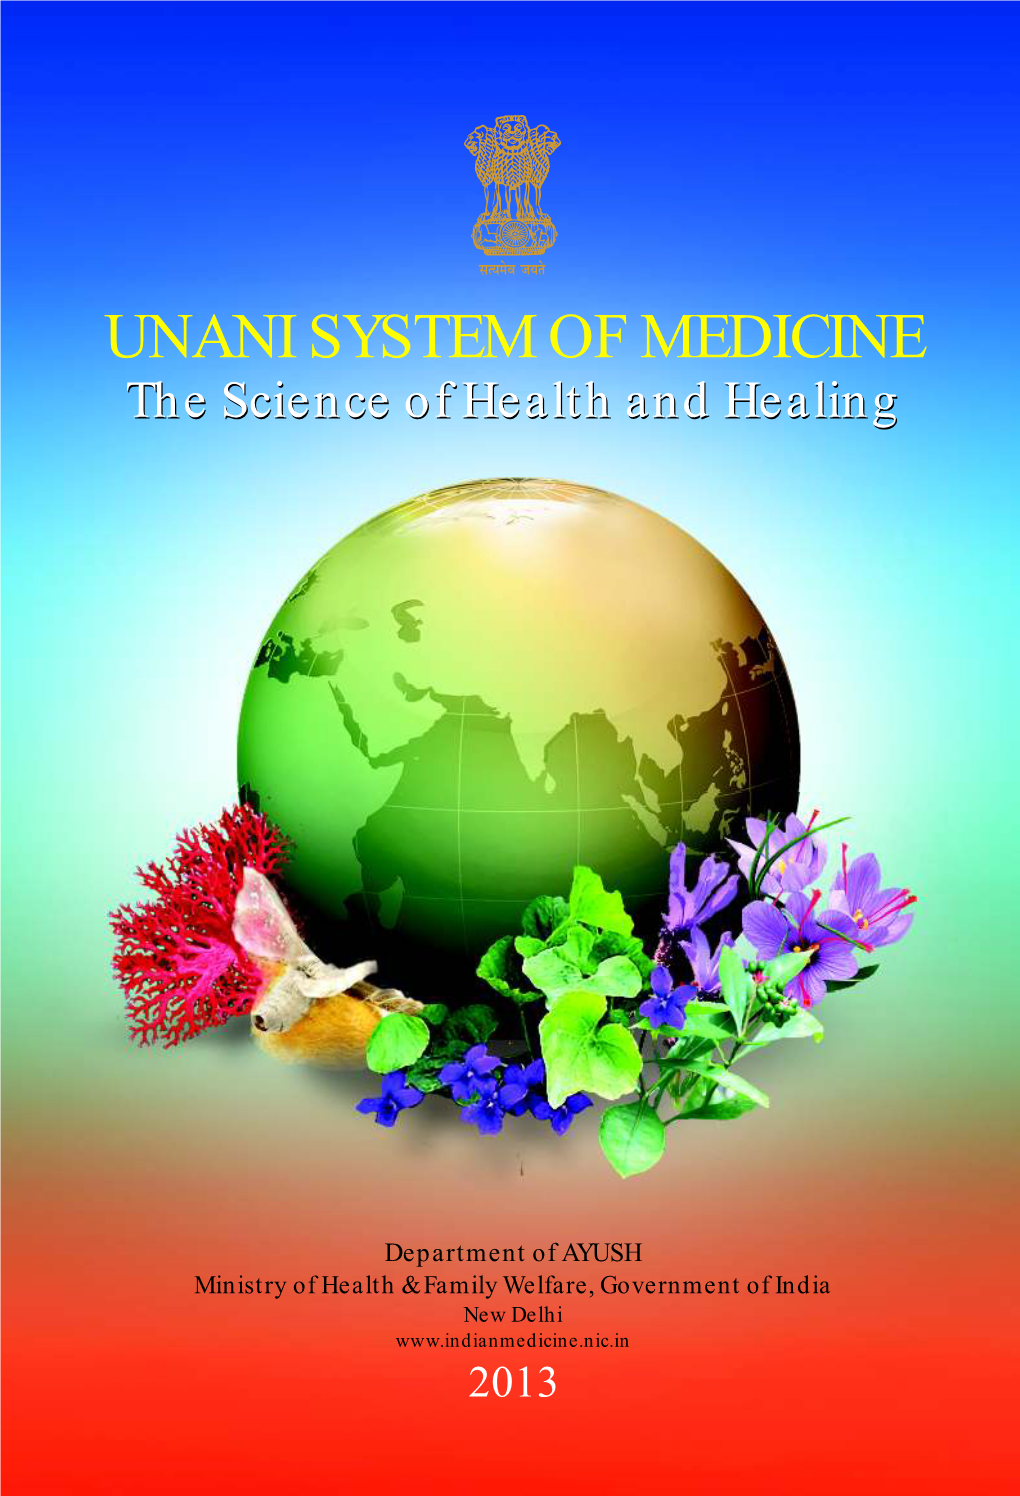 UNANI SYSTEM of MEDICINE the Science of Health and Healing , I N a N U